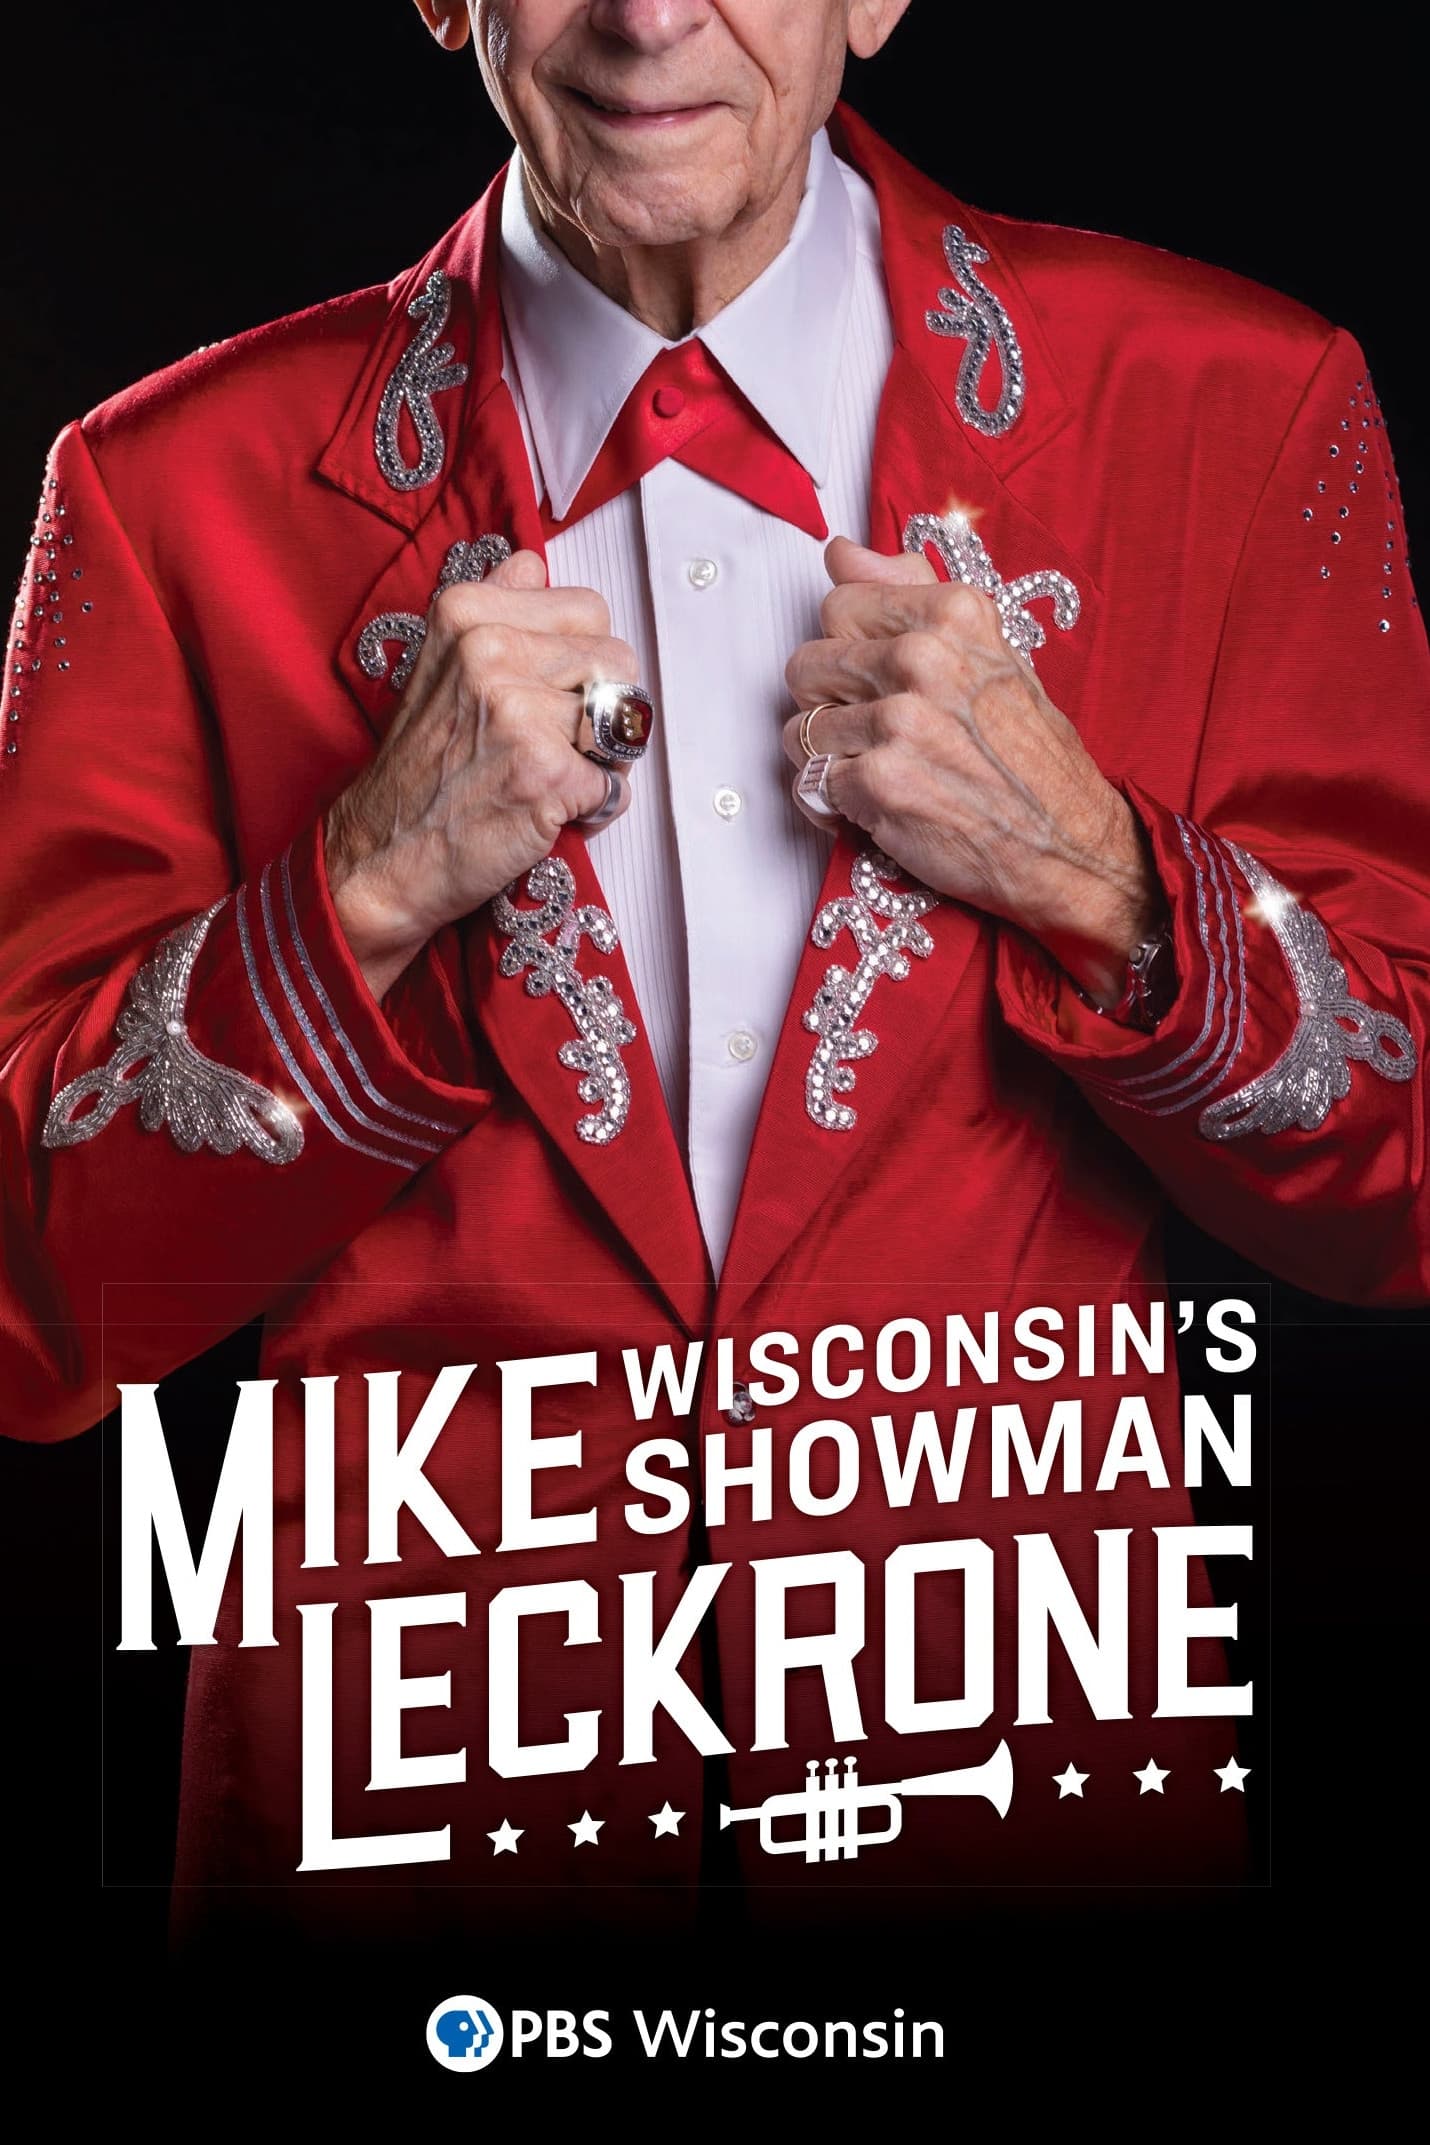 Mike Leckrone: Wisconsin's Showman